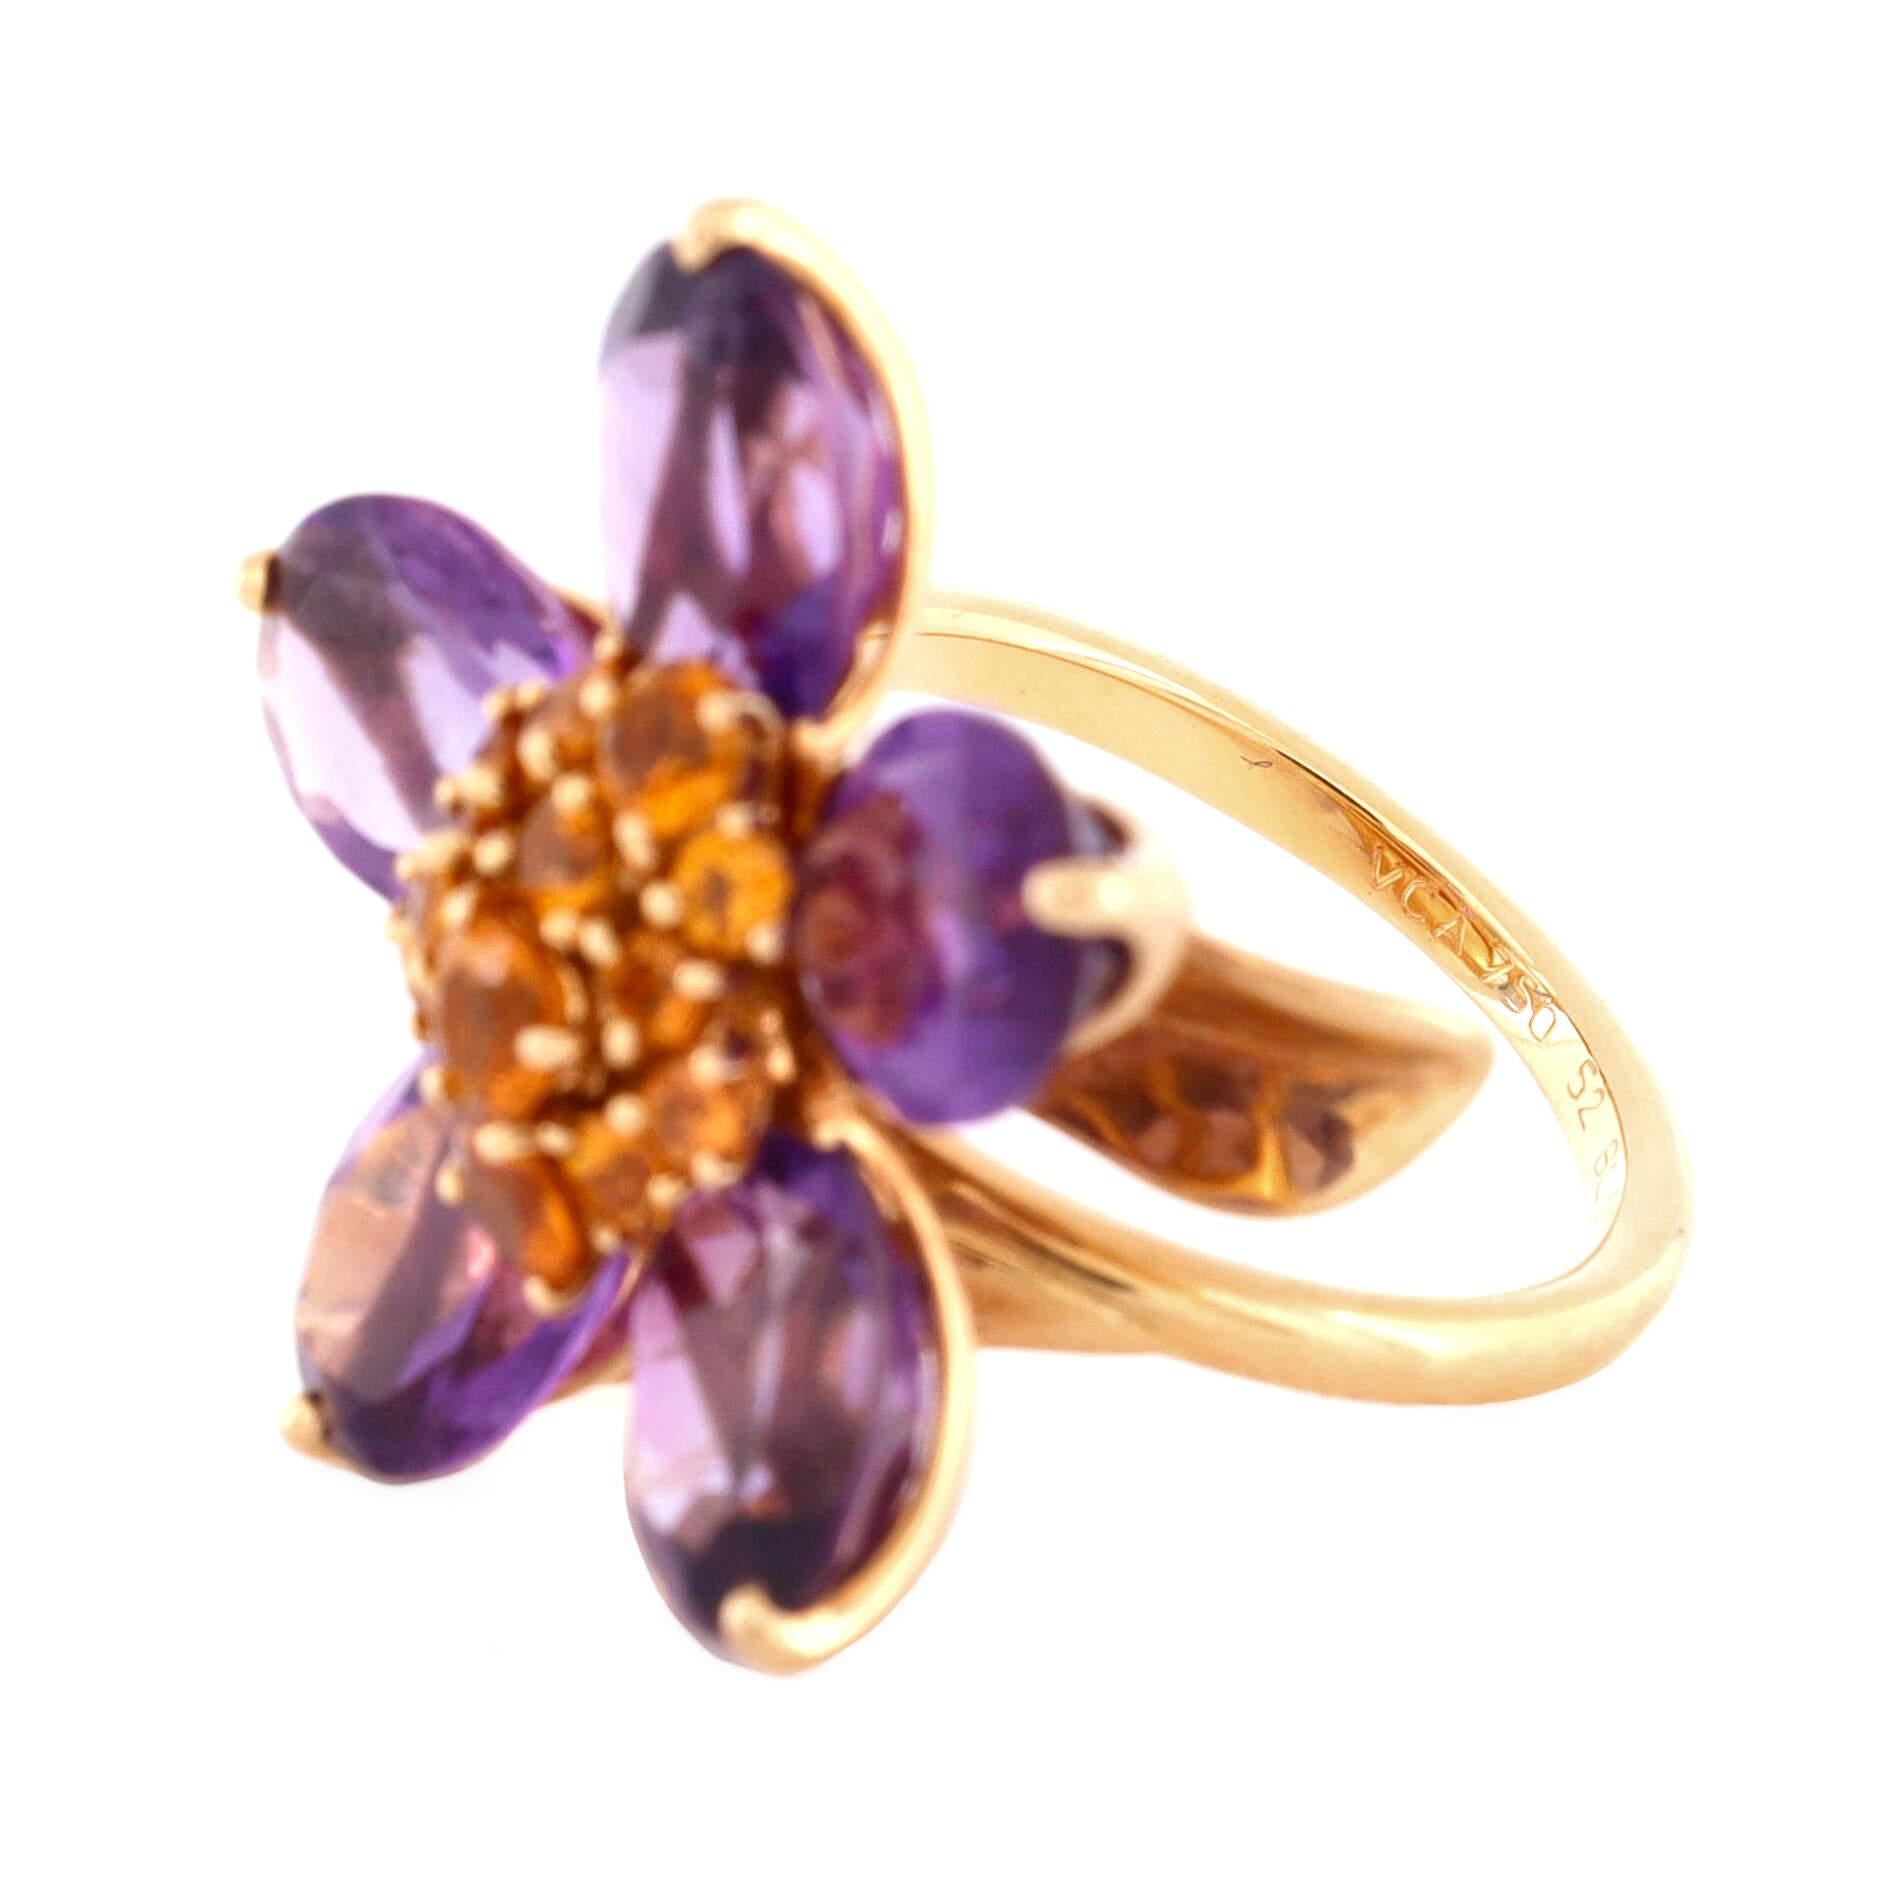 Van Cleef & Arpels Hawaii Flower Ring 18k Yellow Gold with Amethyst and Orange In Good Condition For Sale In New York, NY